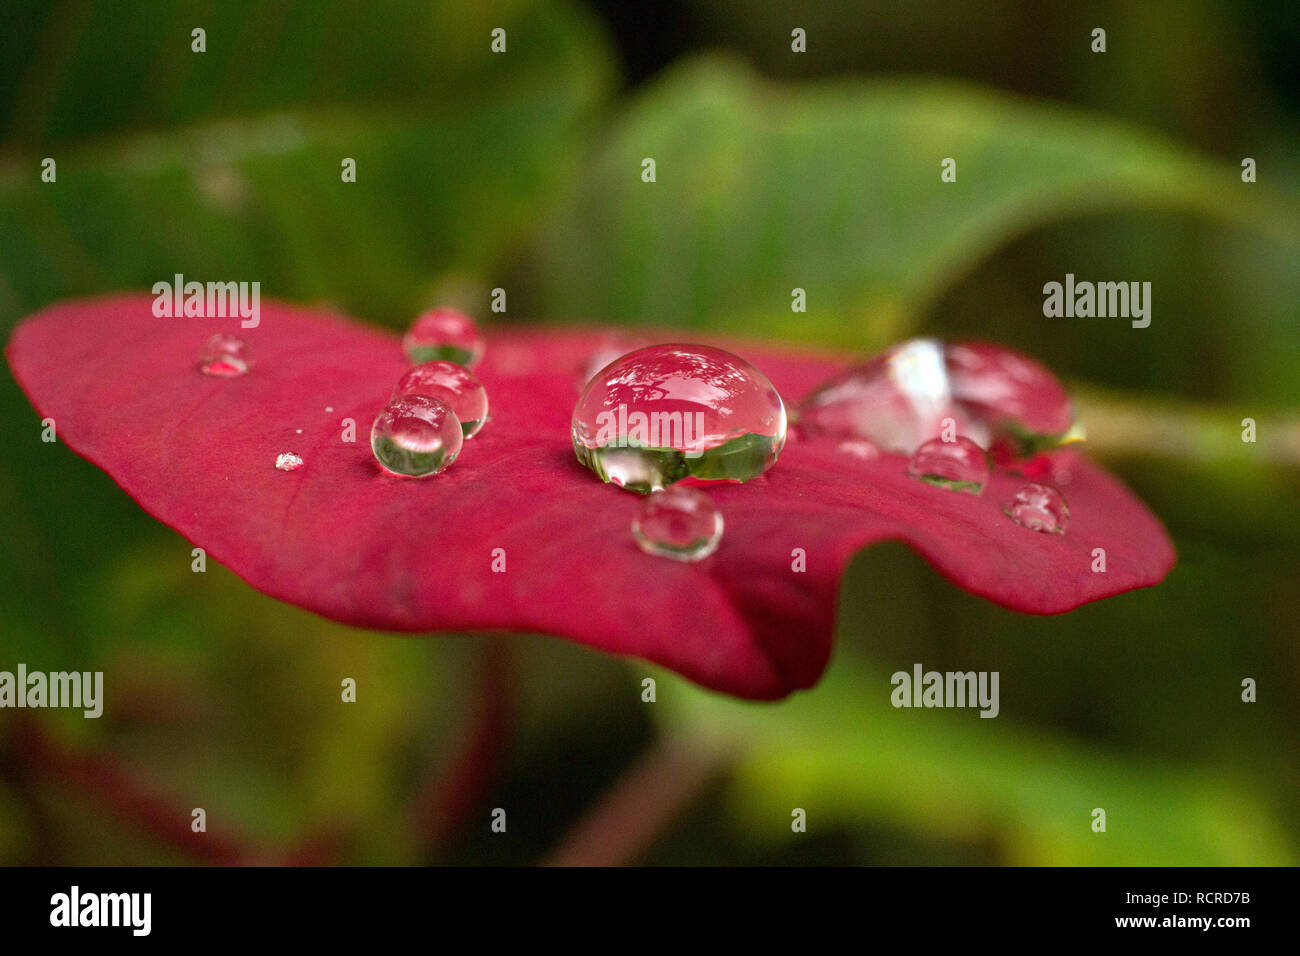 Water drops on a red leaf of poinsettia (Euphorbia pulcherrima), also known as Christmas Star, after rain Stock Photo